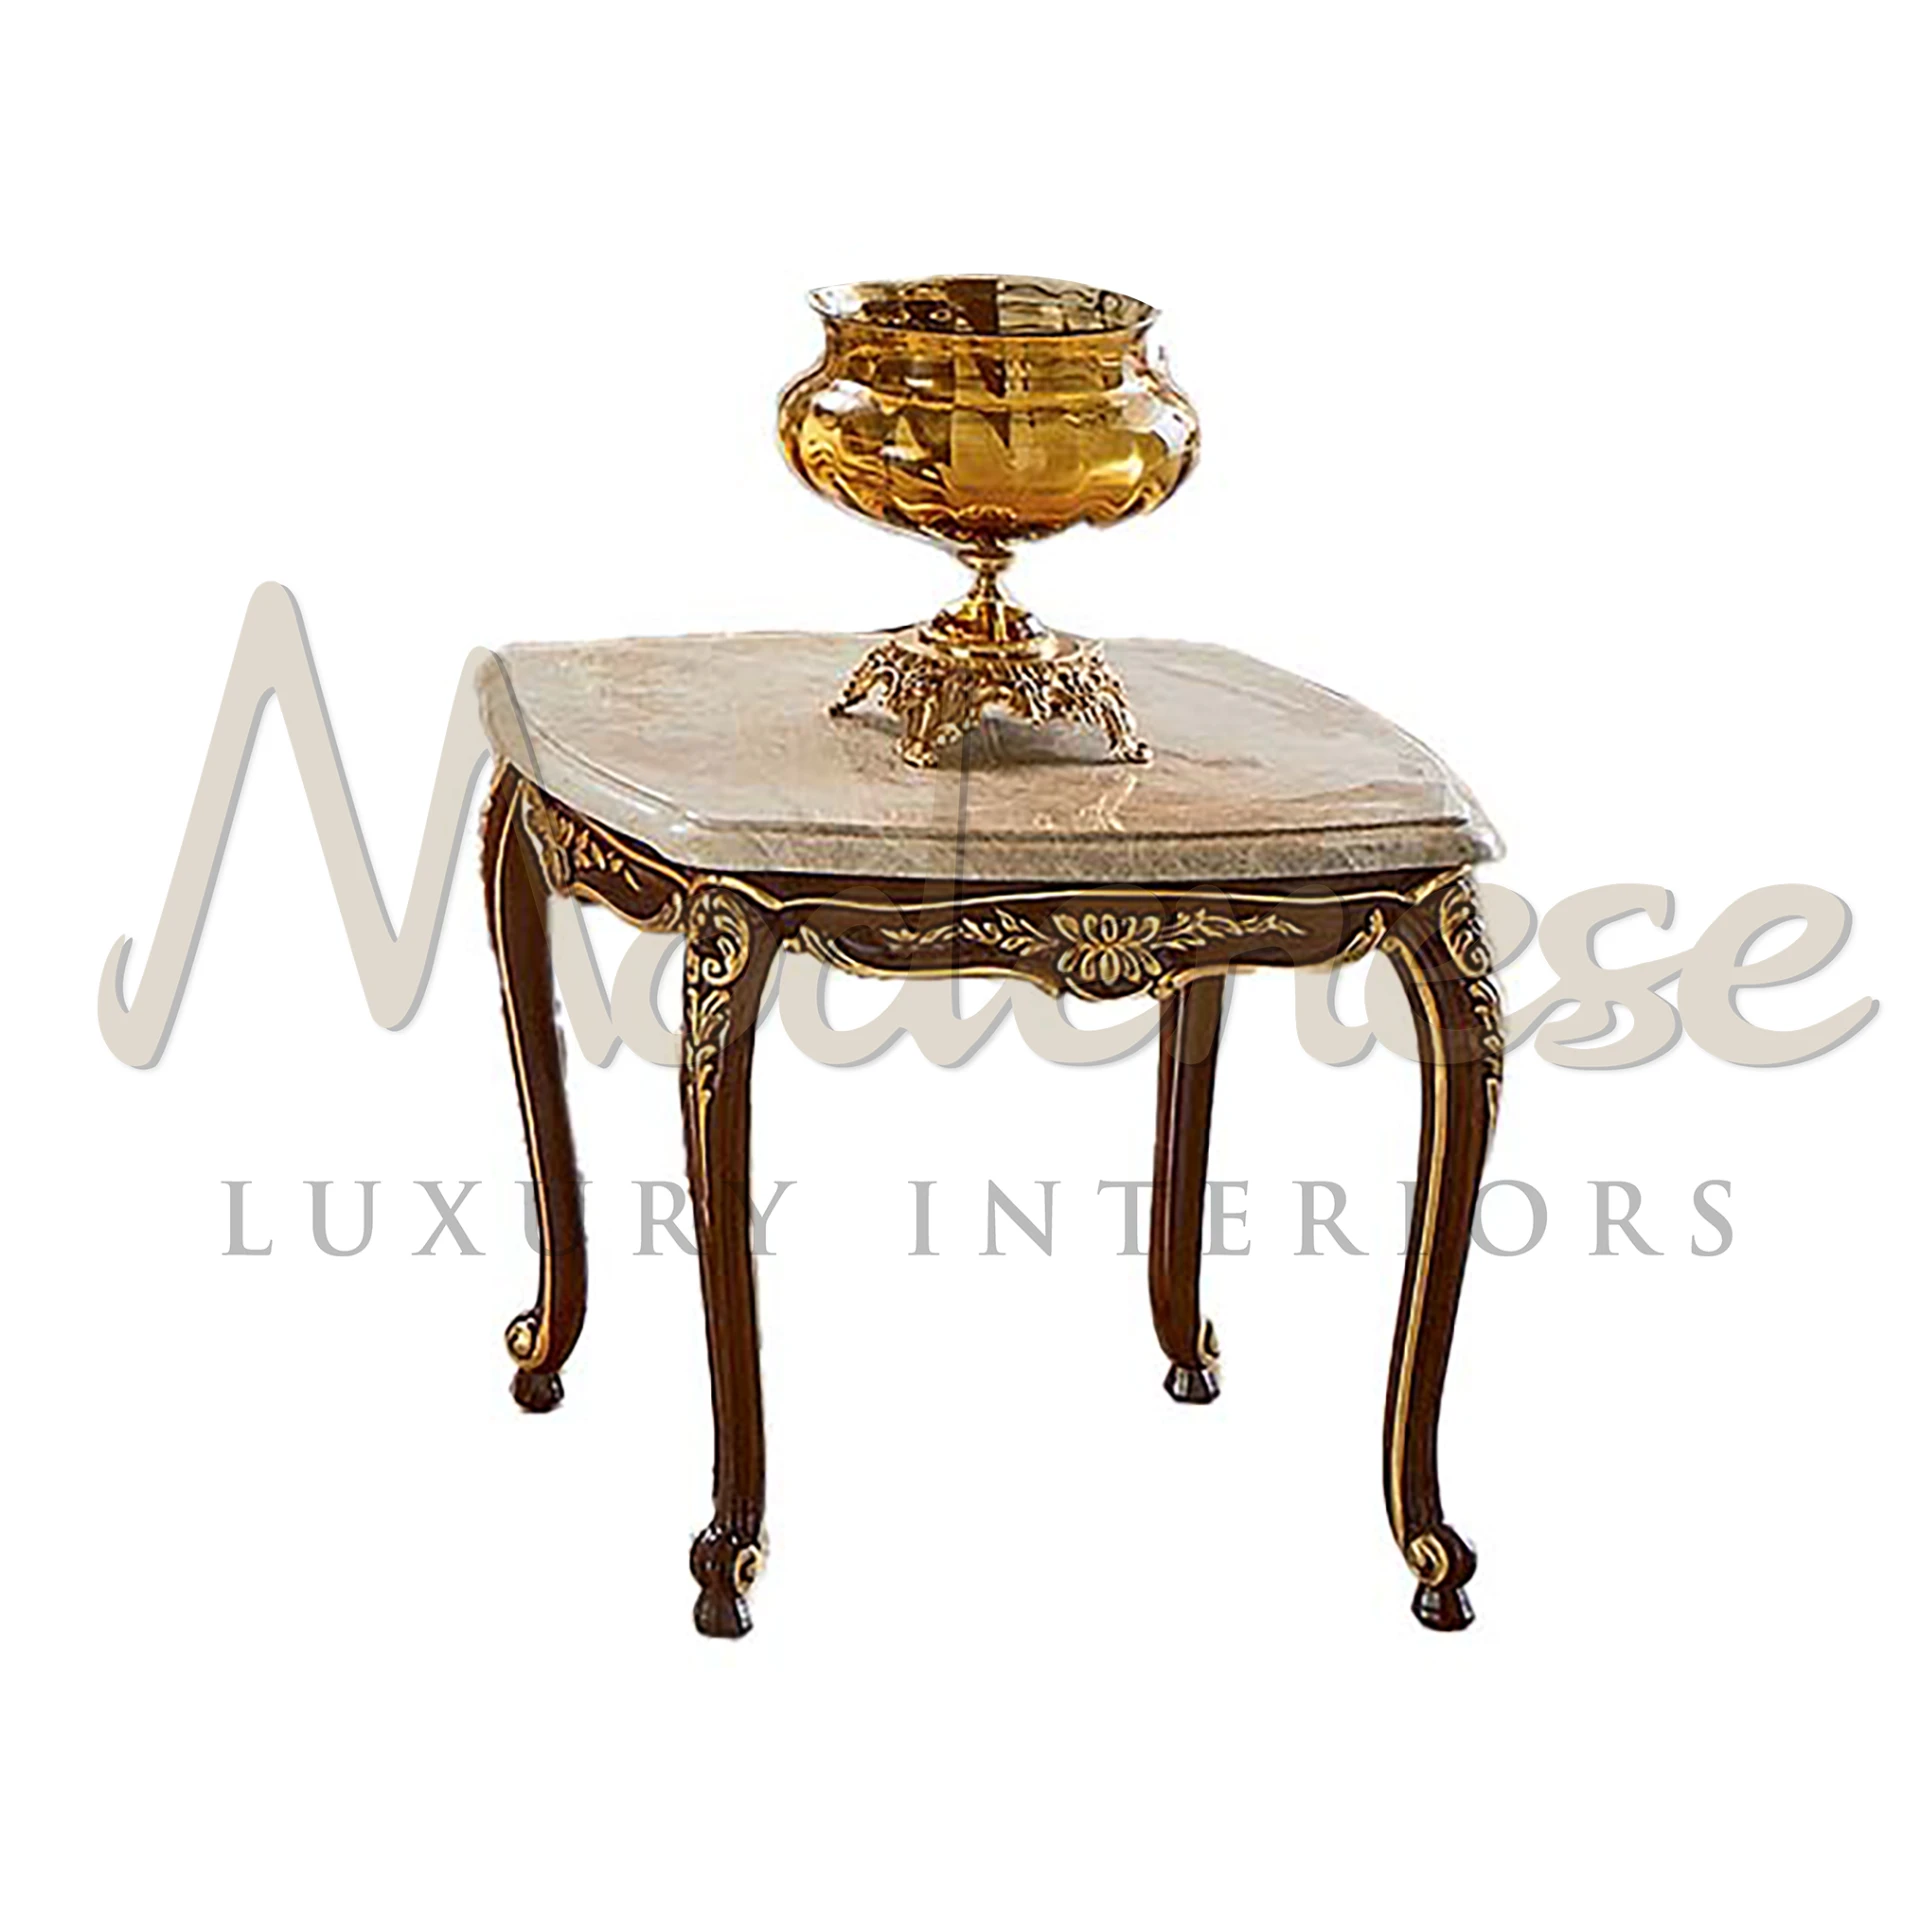 Classic Elegant Square Side Table, made from solid wood with options for gold leaf carvings, embodying Italian design.